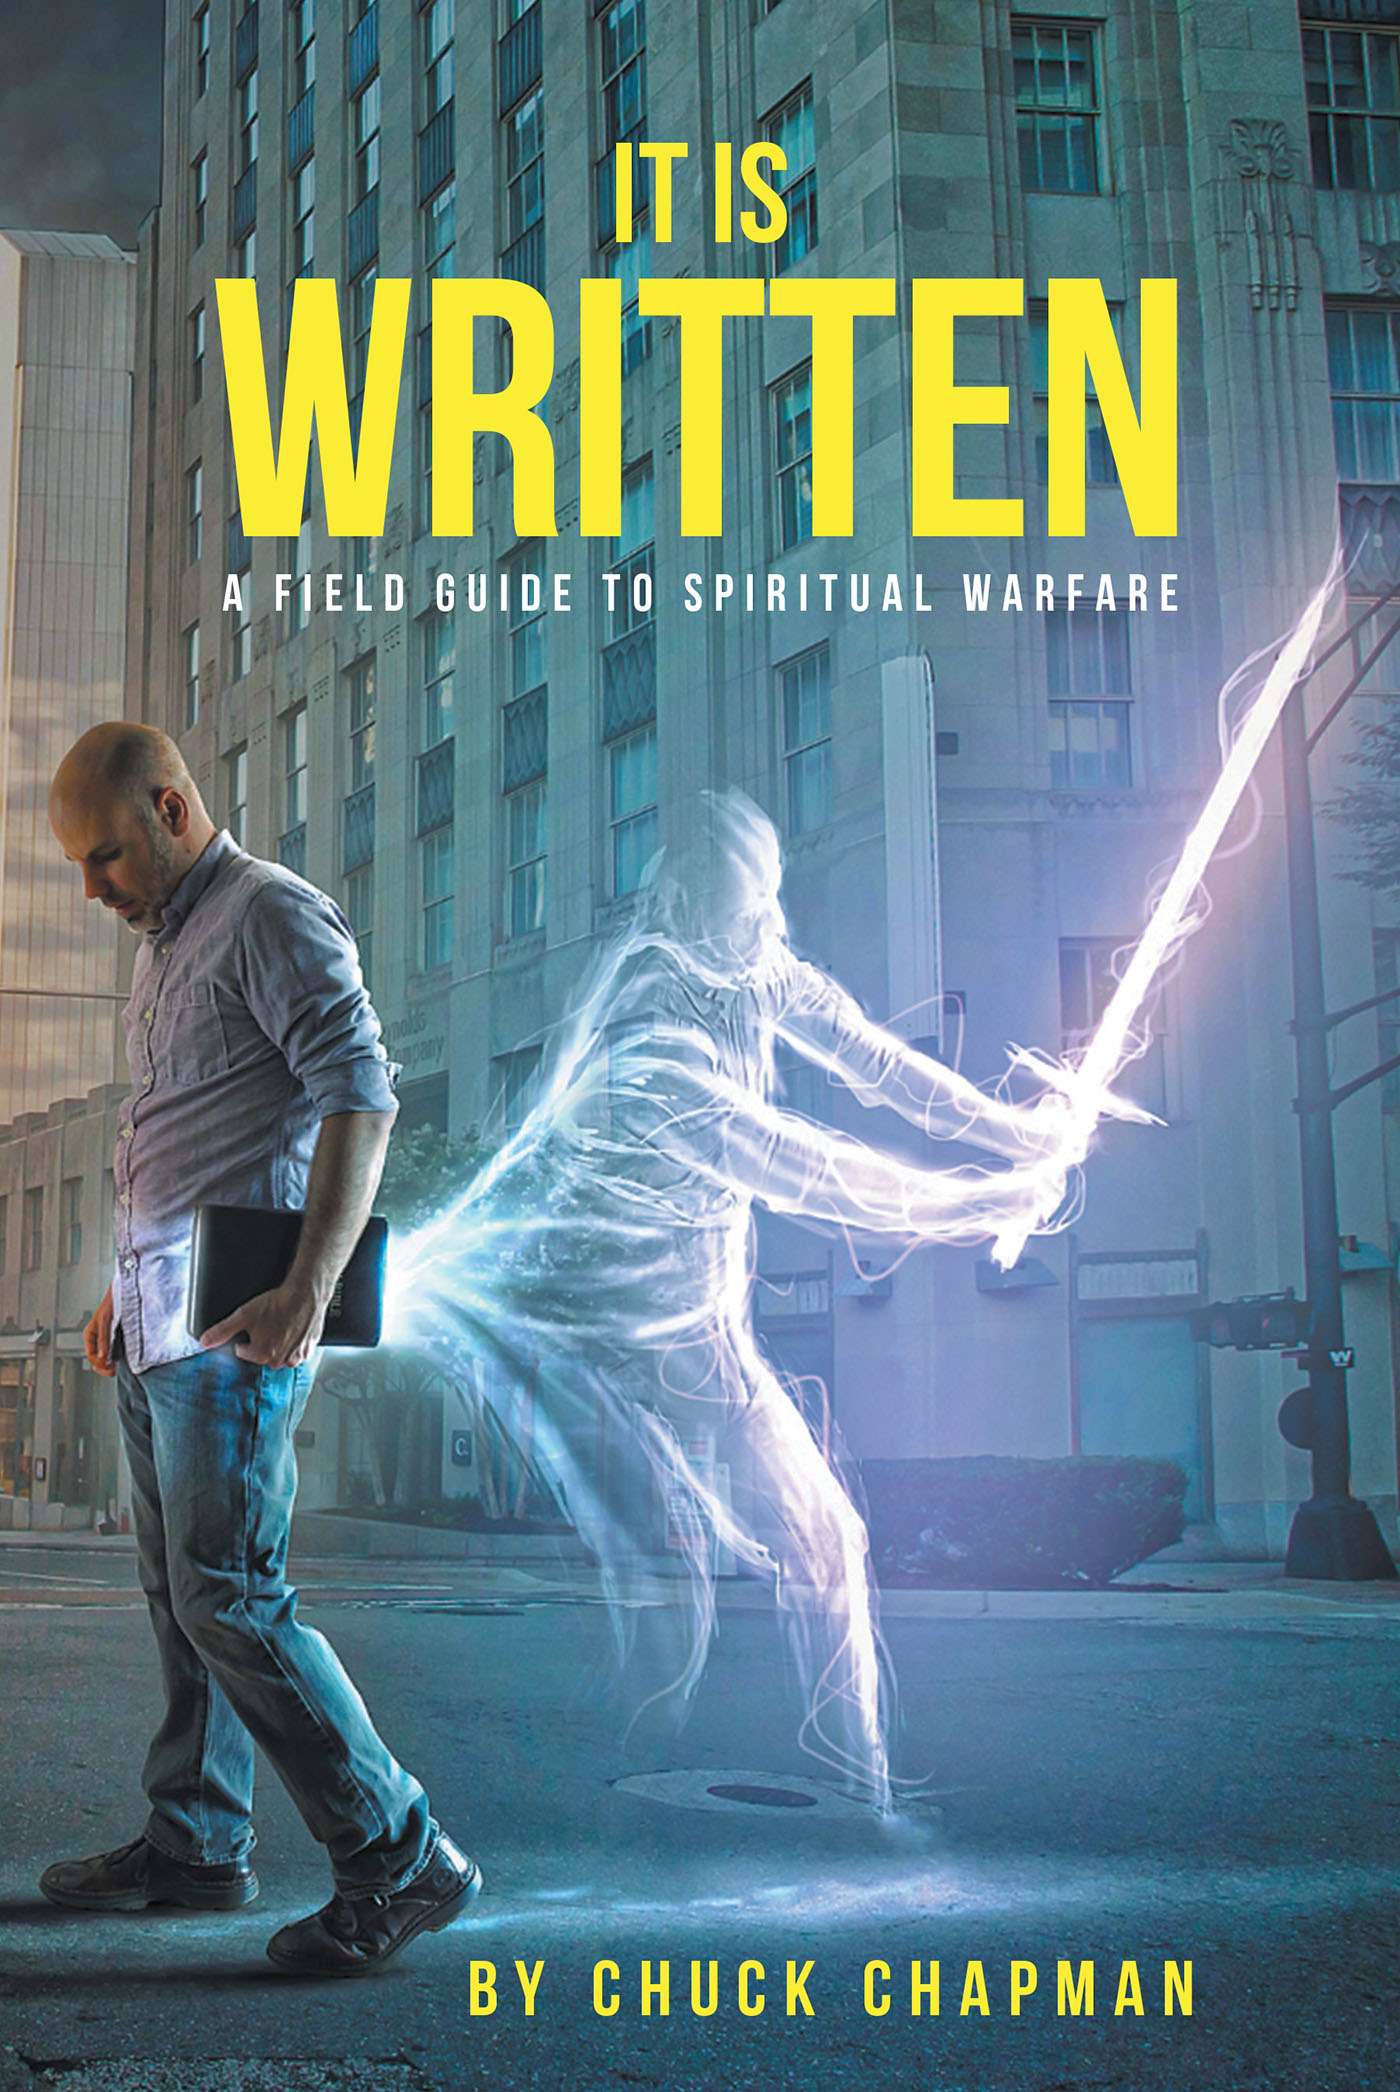 Chuck Chapman’s Newly Released “It Is Written: A Field Guide to Spiritual Warfare” is an Encouraging Resource for Learning Key Spiritual Knowledge